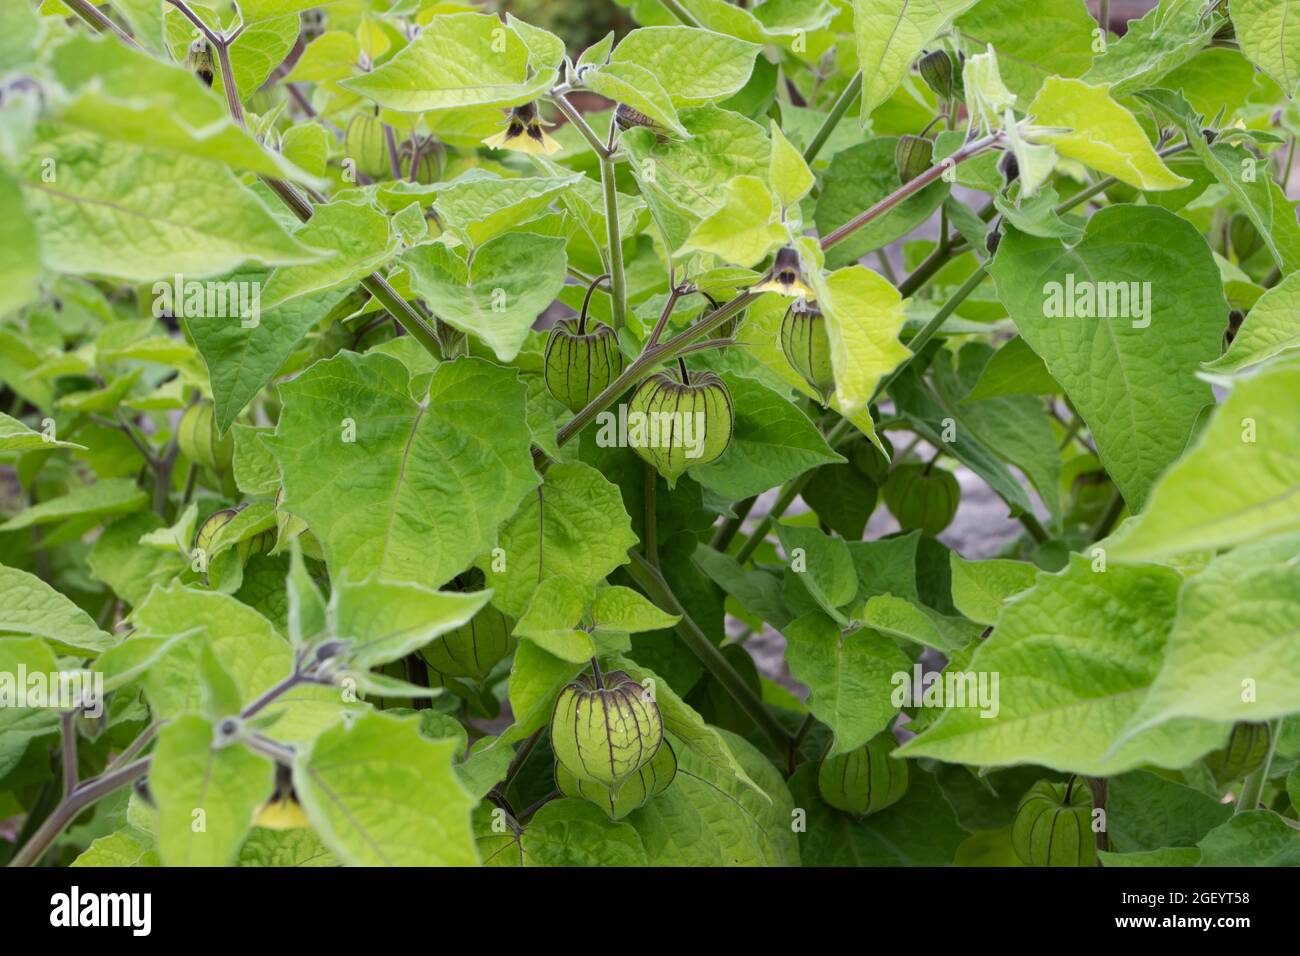 Goldenberry or Cape gooseberry plants with hairy leaves, yellow flowers and immature fruits in green calyx. Physalis peruviana. Stock Photo